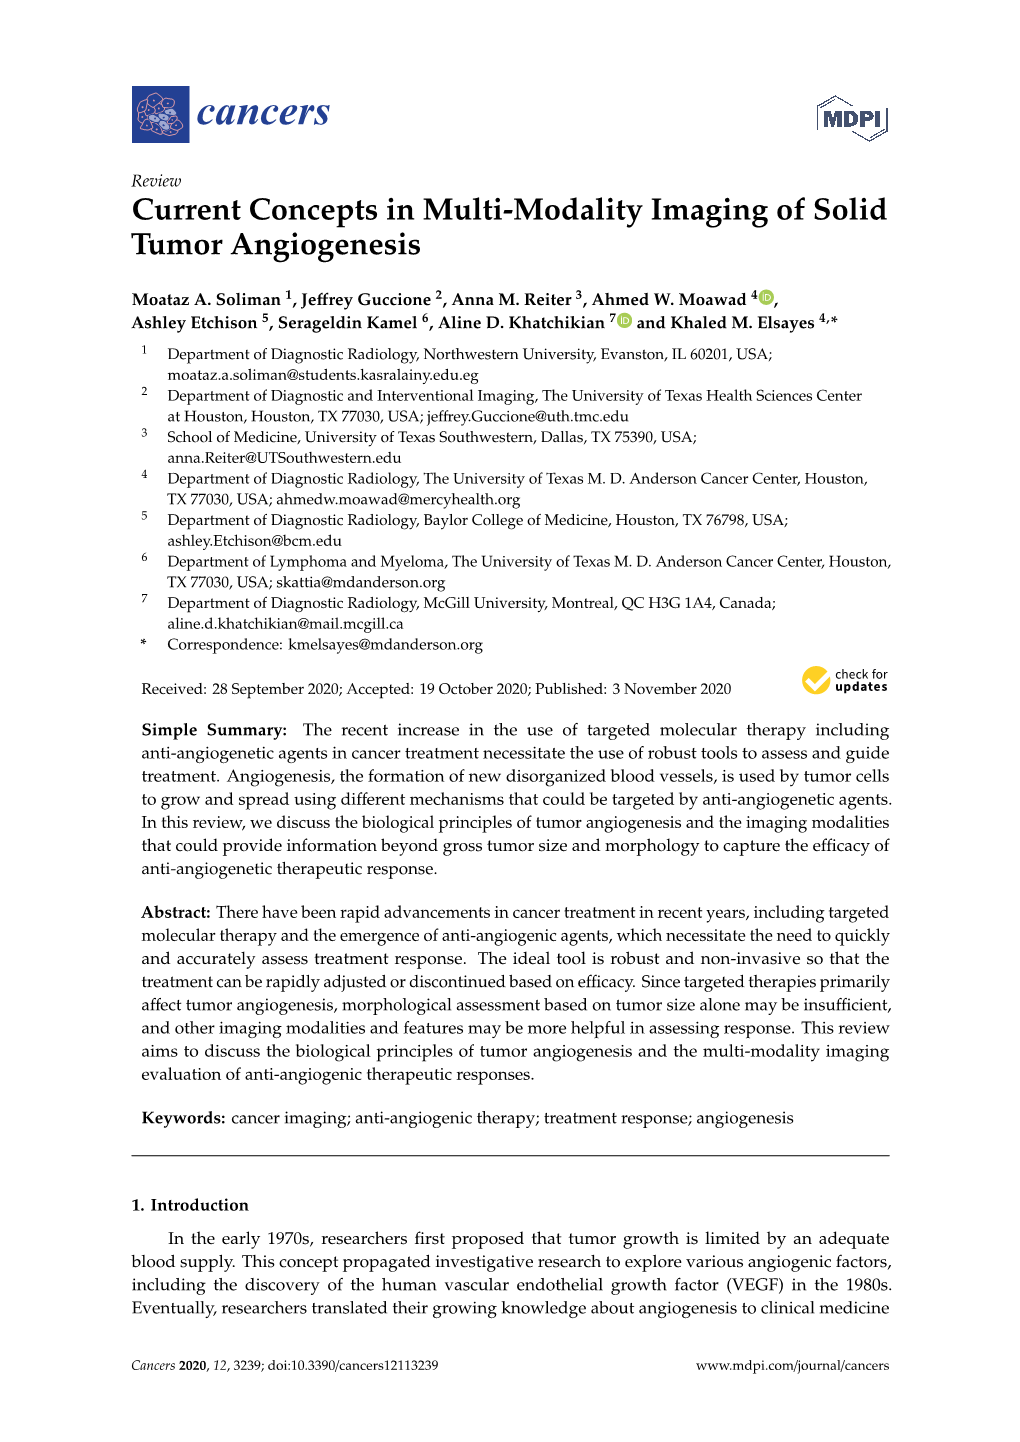 Current Concepts in Multi-Modality Imaging of Solid Tumor Angiogenesis